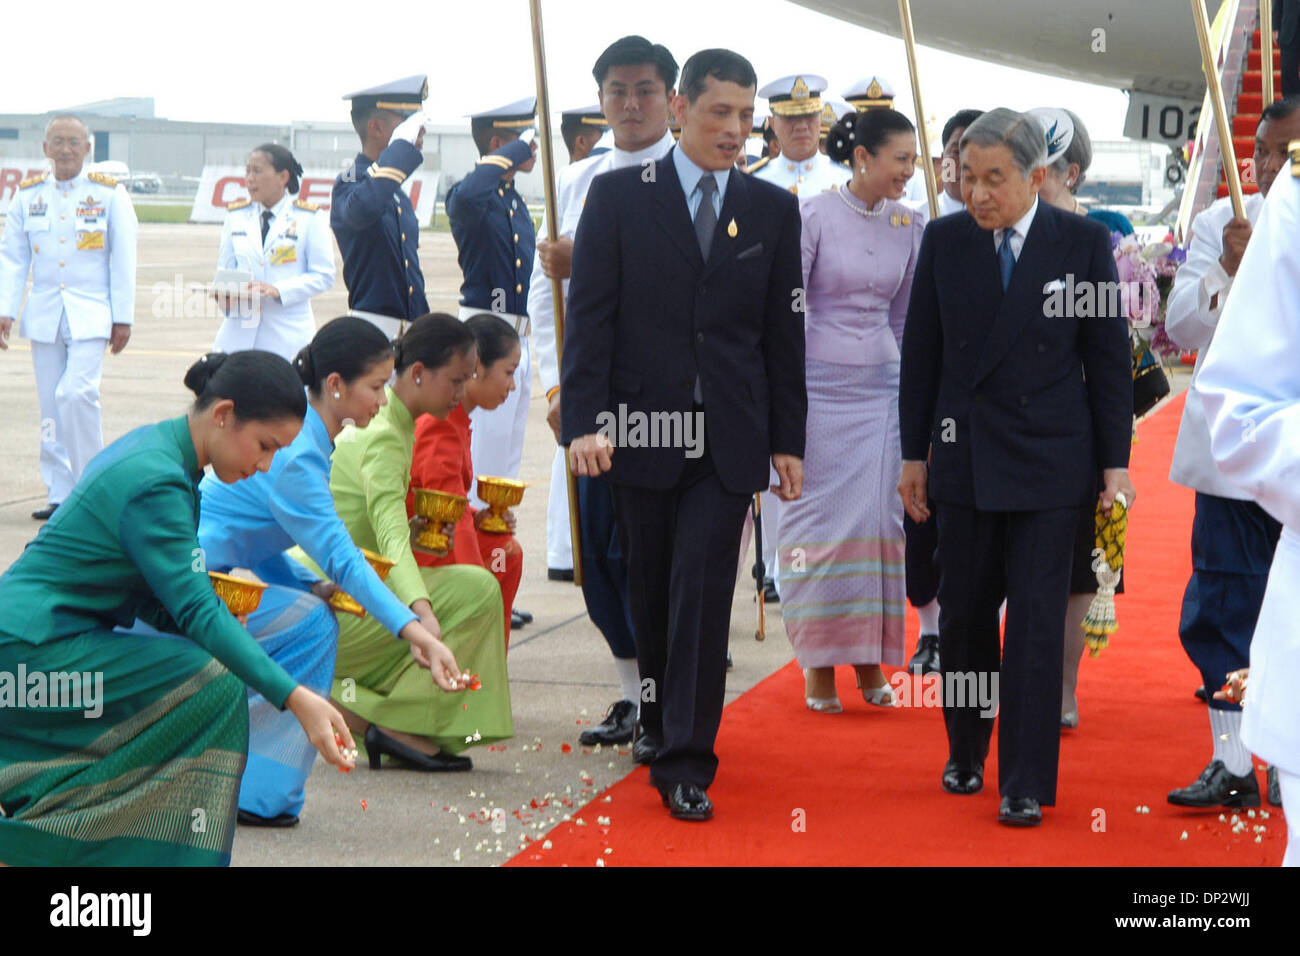 Jun 11, 2006; Bangkok, THAILAND; His Majesty Emperor Akihito & Her Majesety Empress Michiko of Japan arrive at Bangkok Military Airport to join the King of Thailand's 60th Anniversary celebrations. Royal guests from 25 nations are expected to arrive in Bangkok for His Majesty King Bumibol Adulyadej's 60th Anniversary on the Throne celebrations. On Monday the 12th the royal guests w Stock Photo